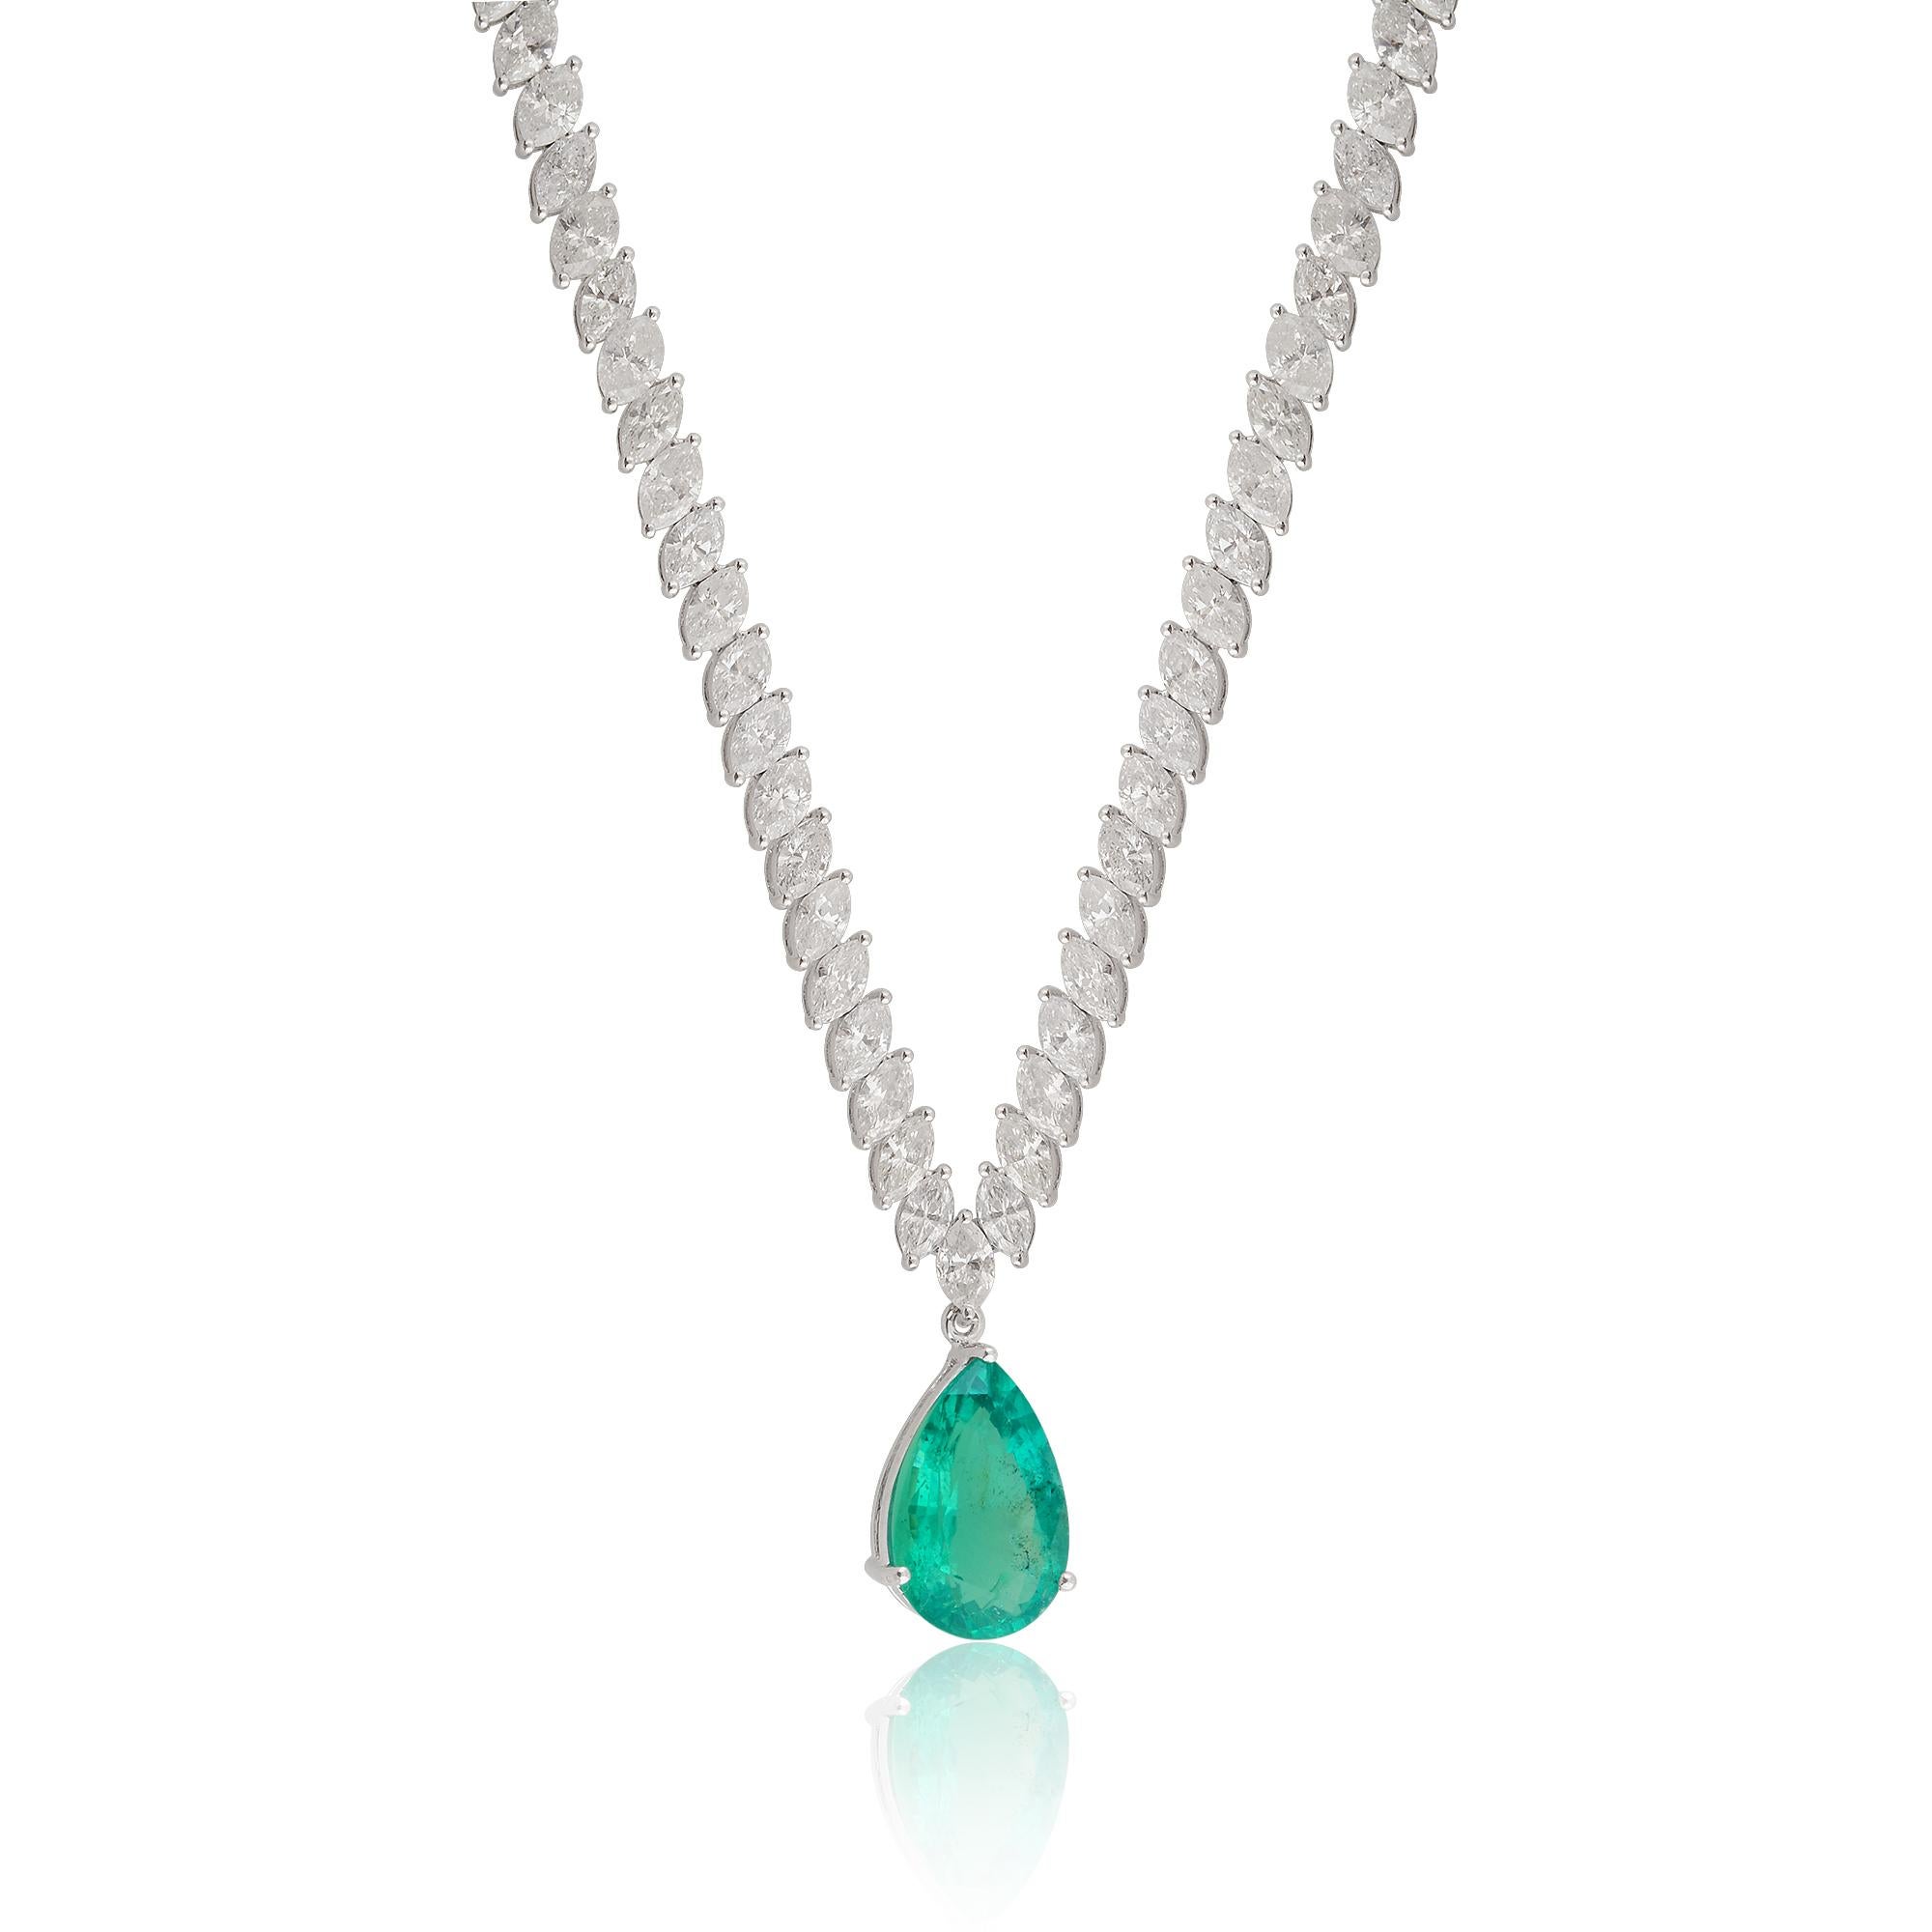 A charm necklace featuring a pear-shaped Zambian emerald gemstone and diamonds in 18 karat white gold is a stunning and elegant piece of jewelry. The necklace typically features a single pear-shaped Zambian emerald as the centerpiece, surrounded by